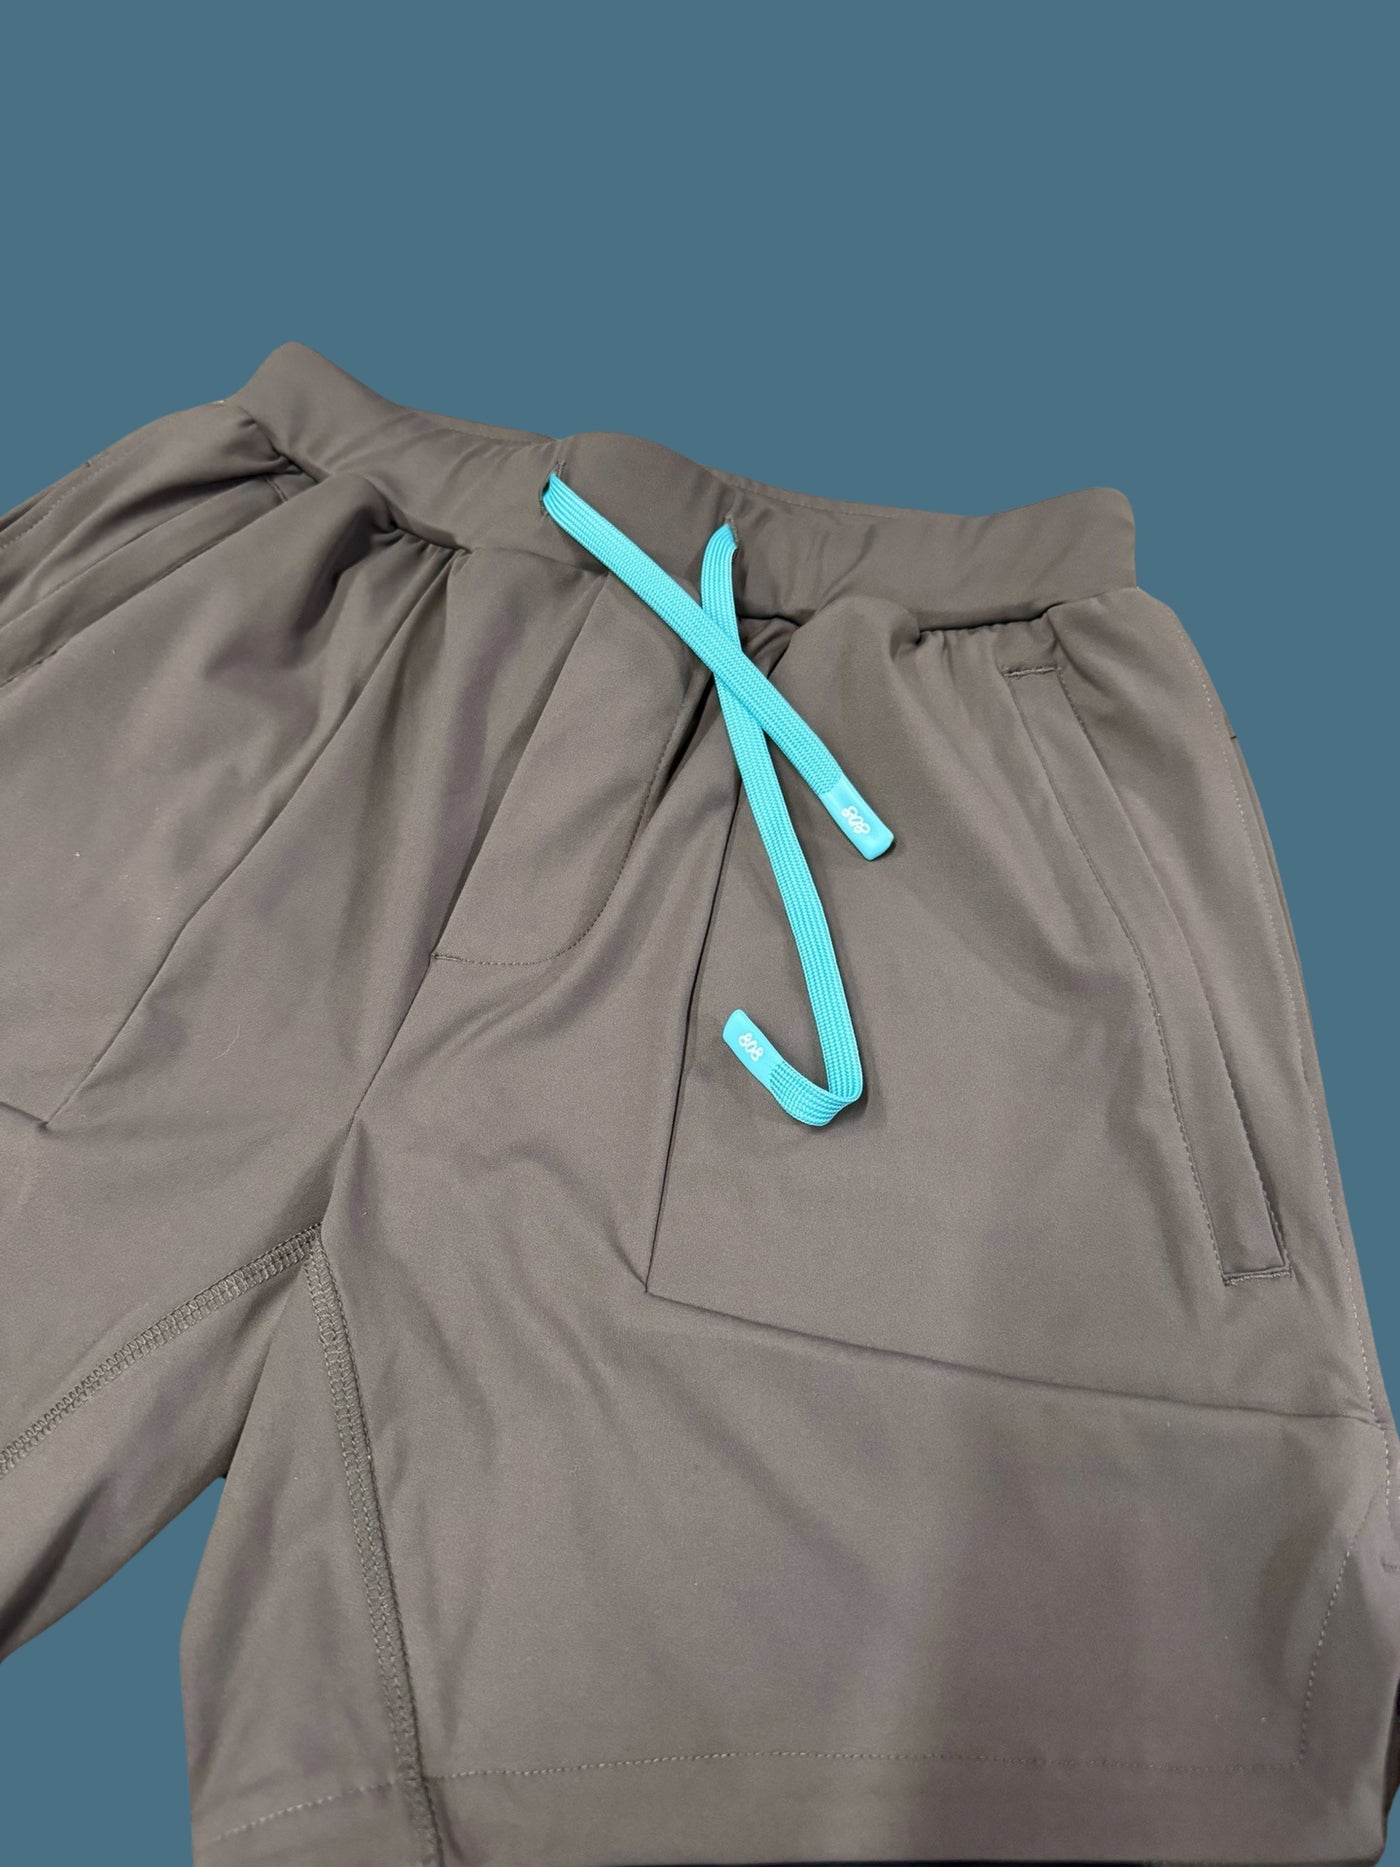 The Stingrays 2.0: Lined Shorts, Premium 6" Shorts Second Edition